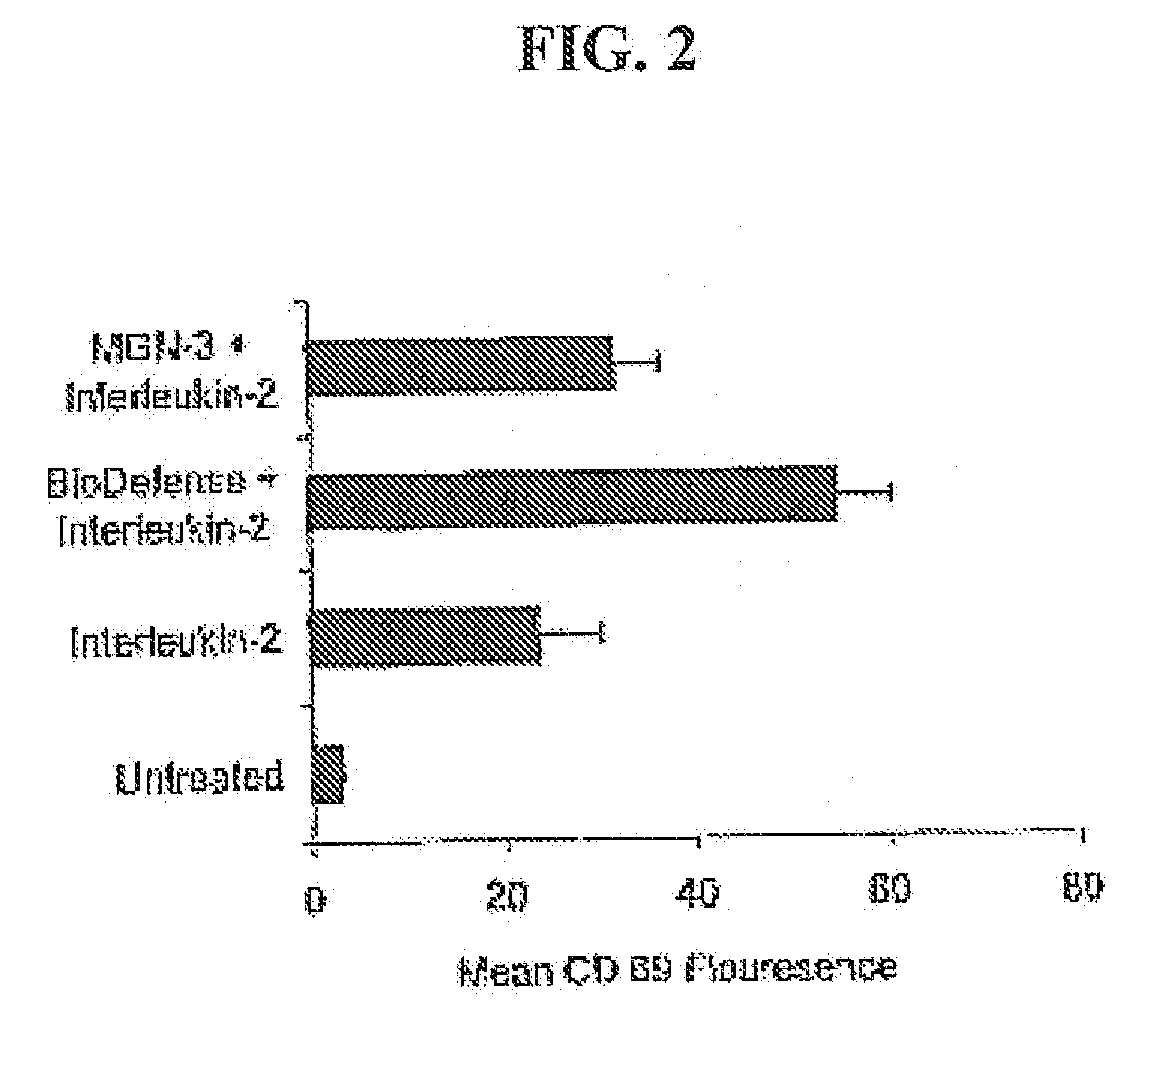 Herbal compositions, methods of stimulating immunomodulation and enhancement of immunomodulating agents using the herbal compositions